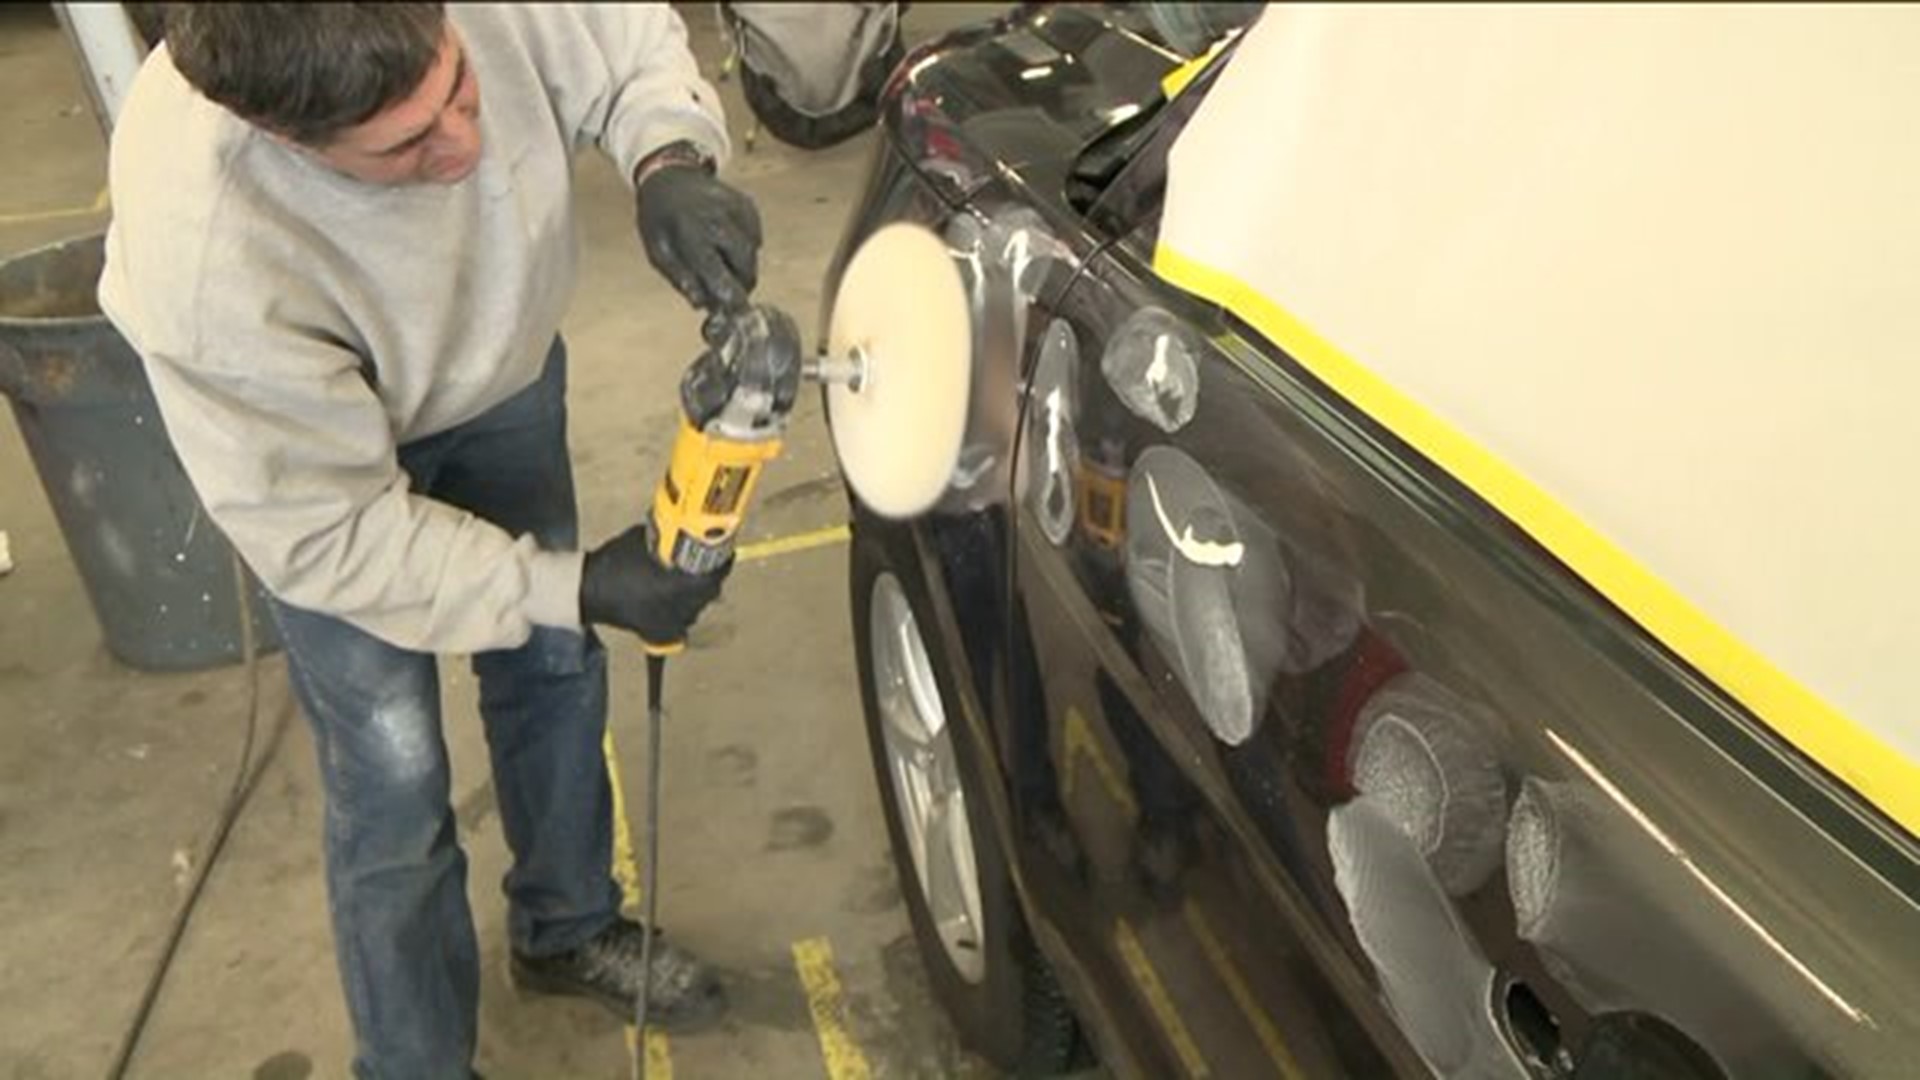 Storm brings business to body shops